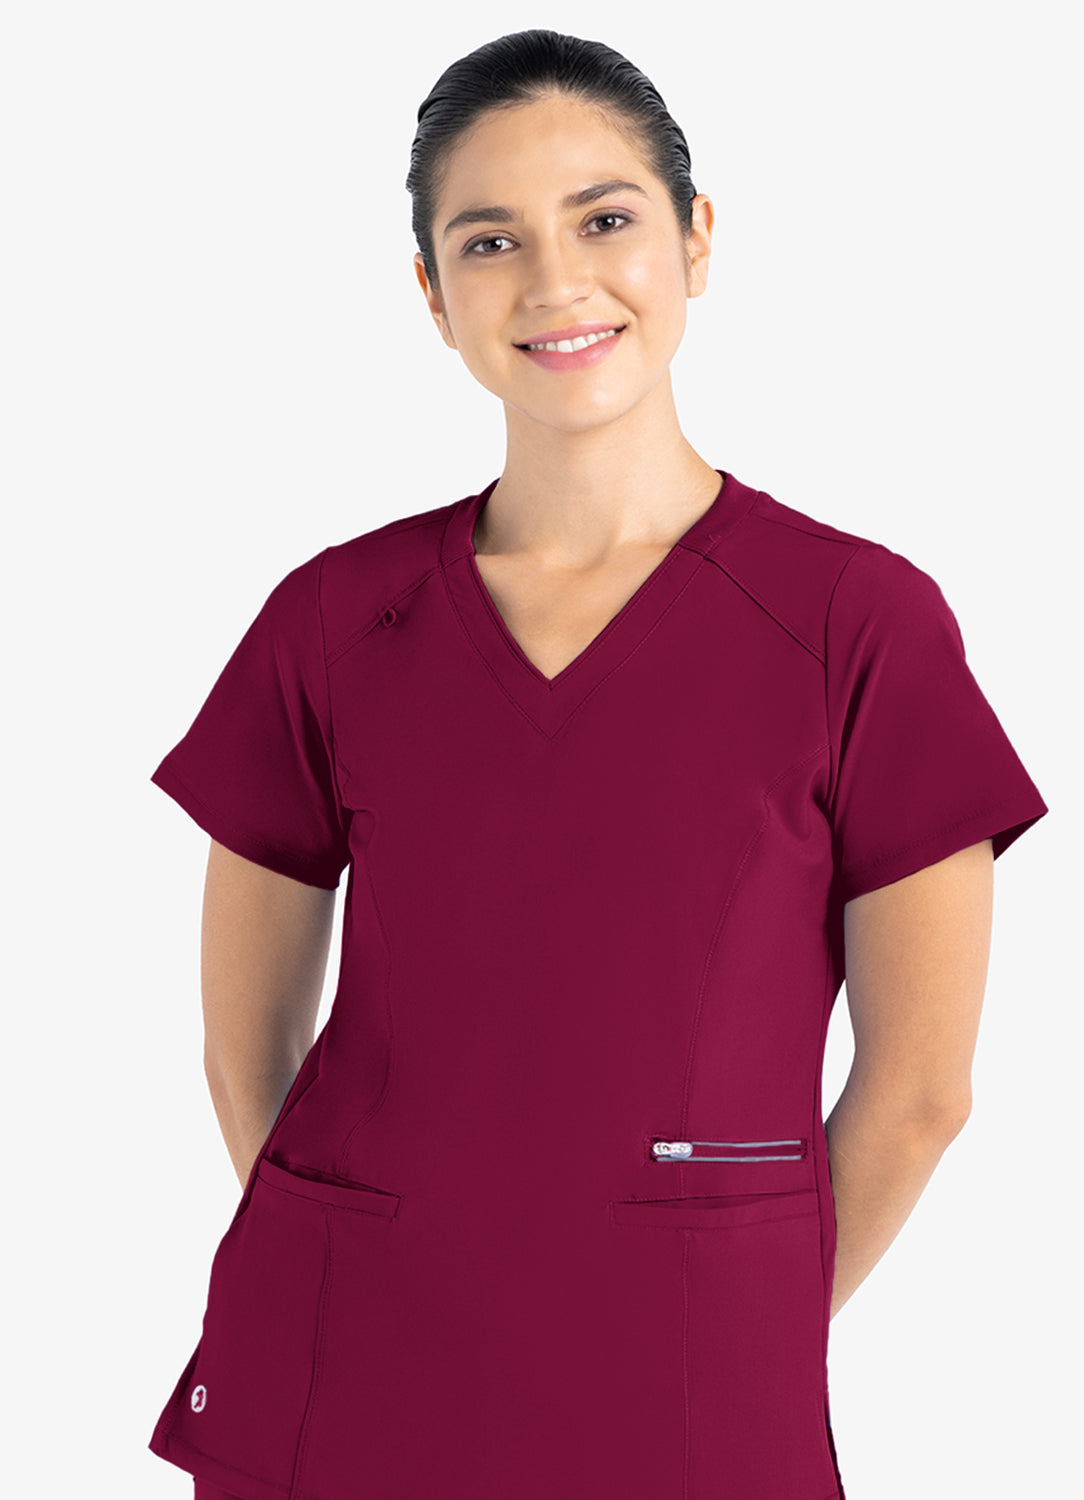 LIMITED EDITION LIFETHREADS WOMEN’S ACTIVE FASHION SCRUB TOP